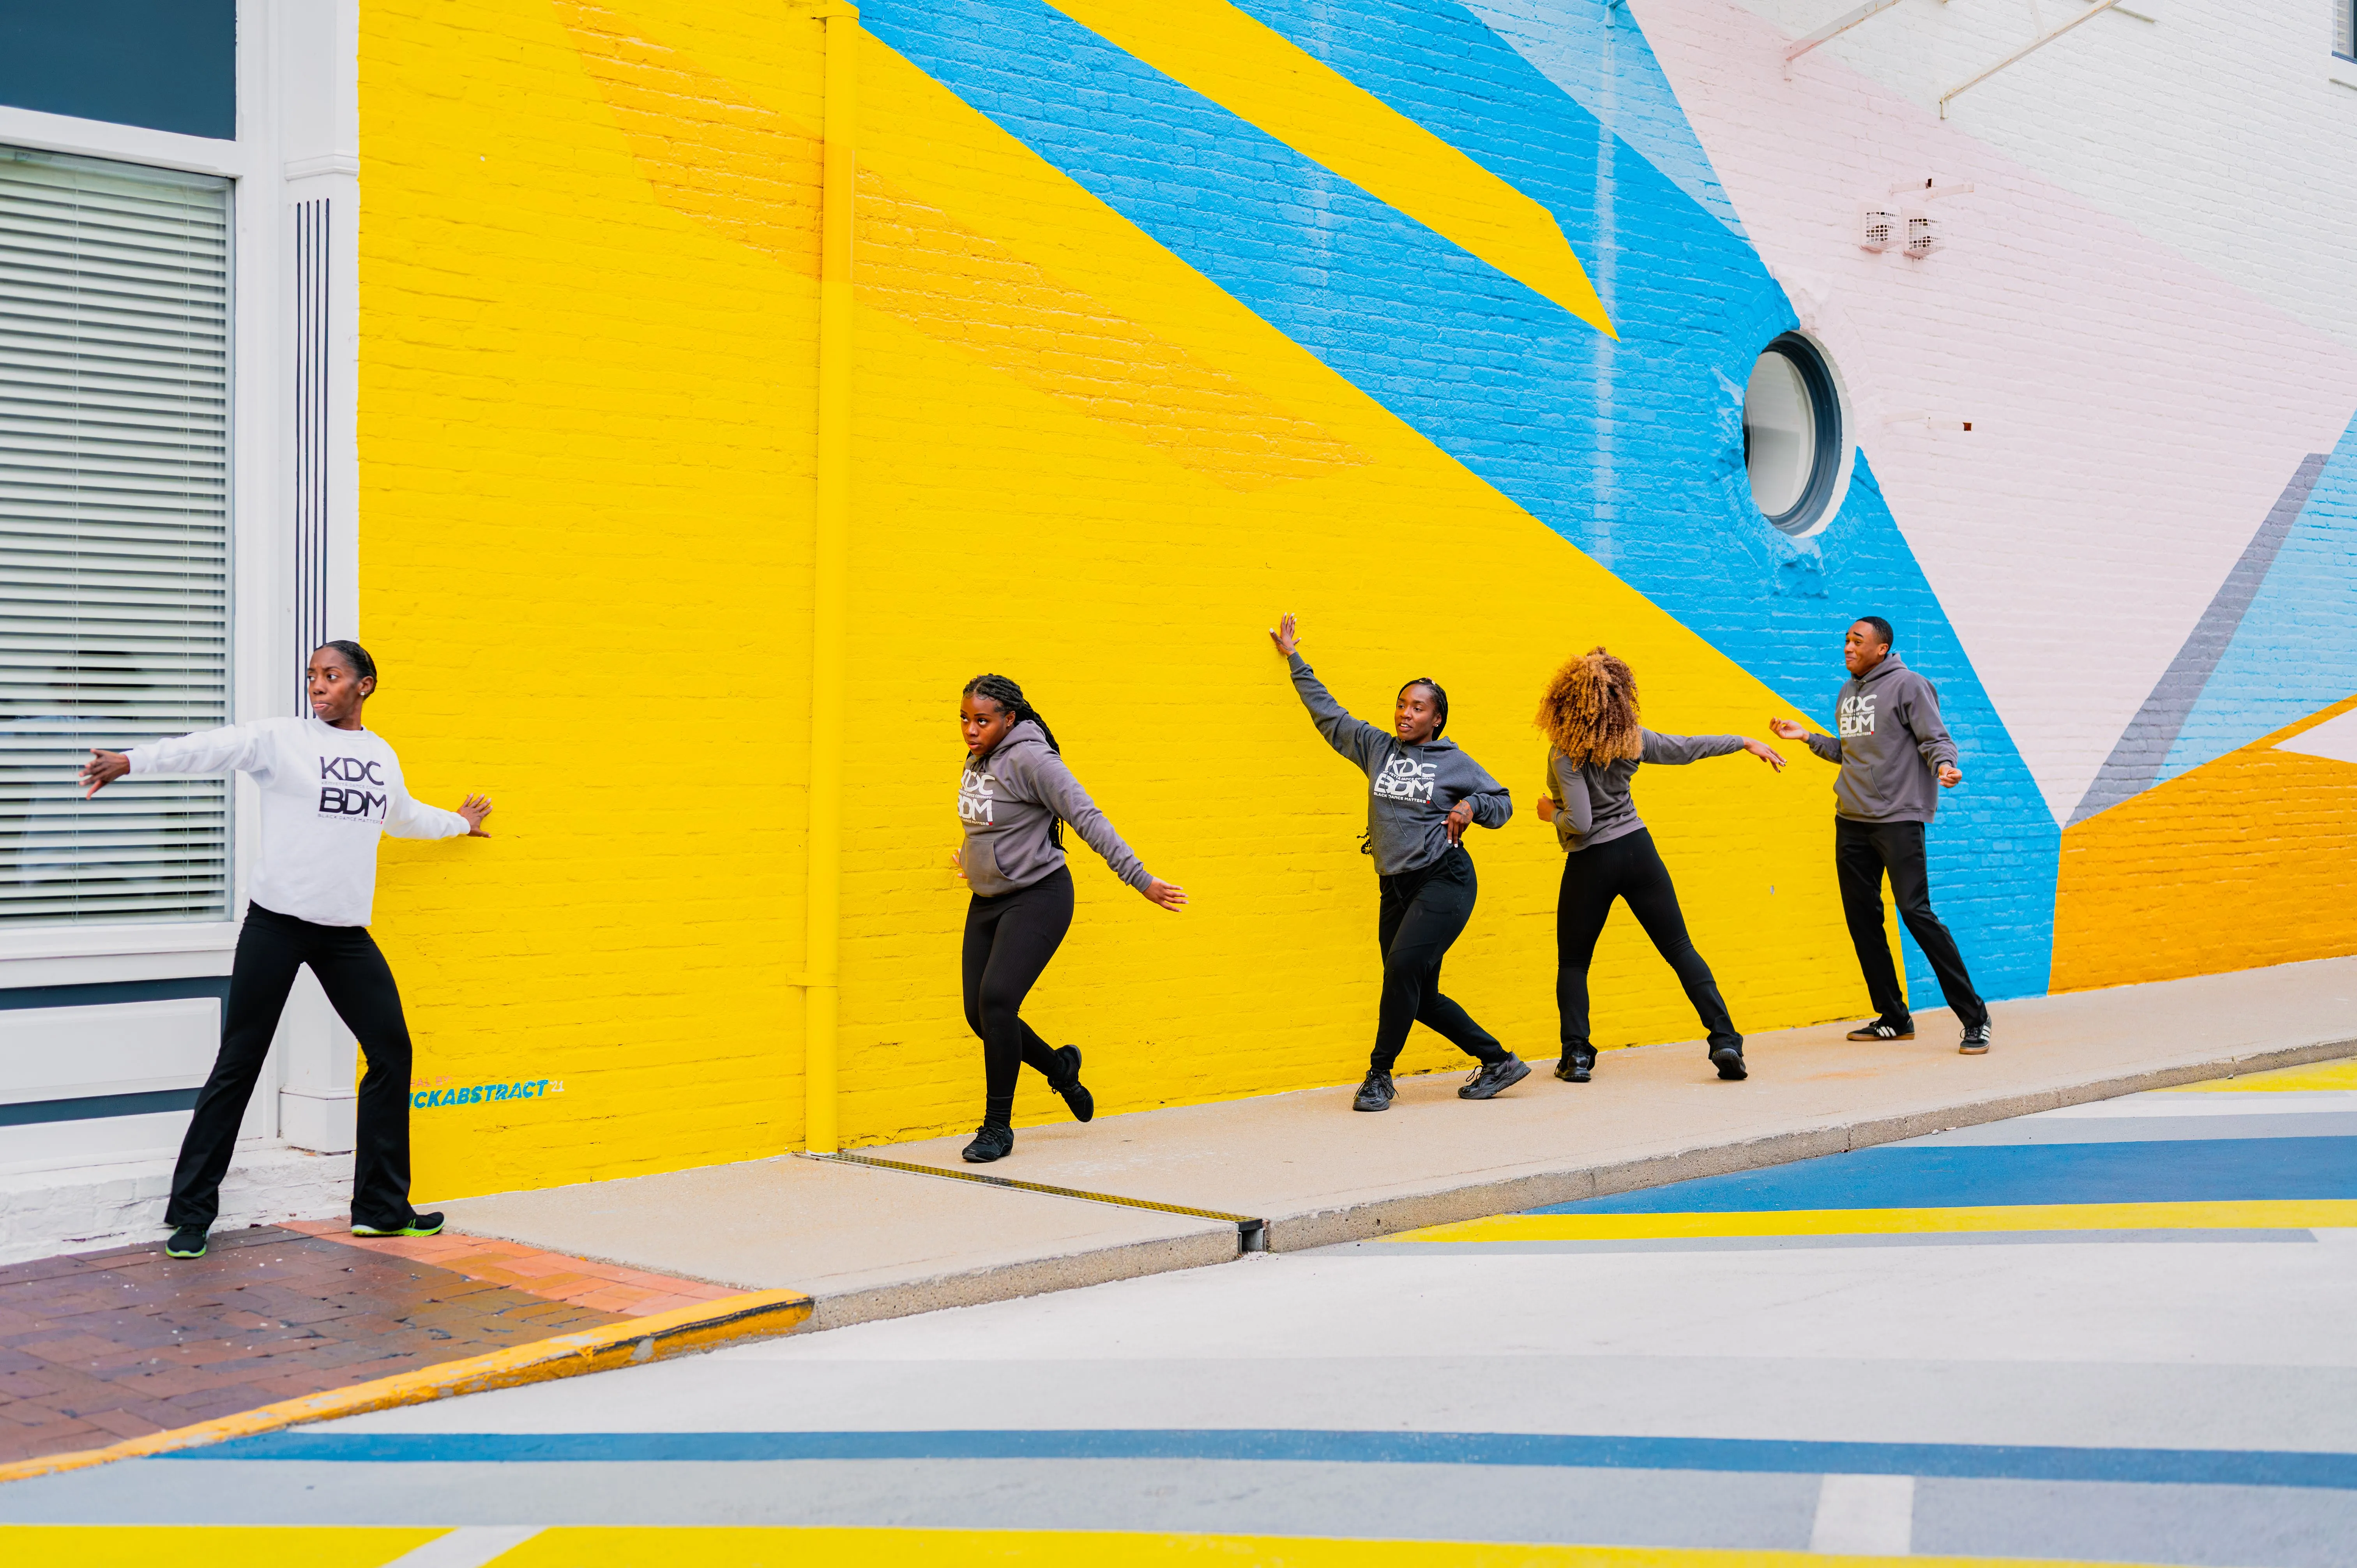 Group of people in a playful pose walking in line against a colorful geometric background.